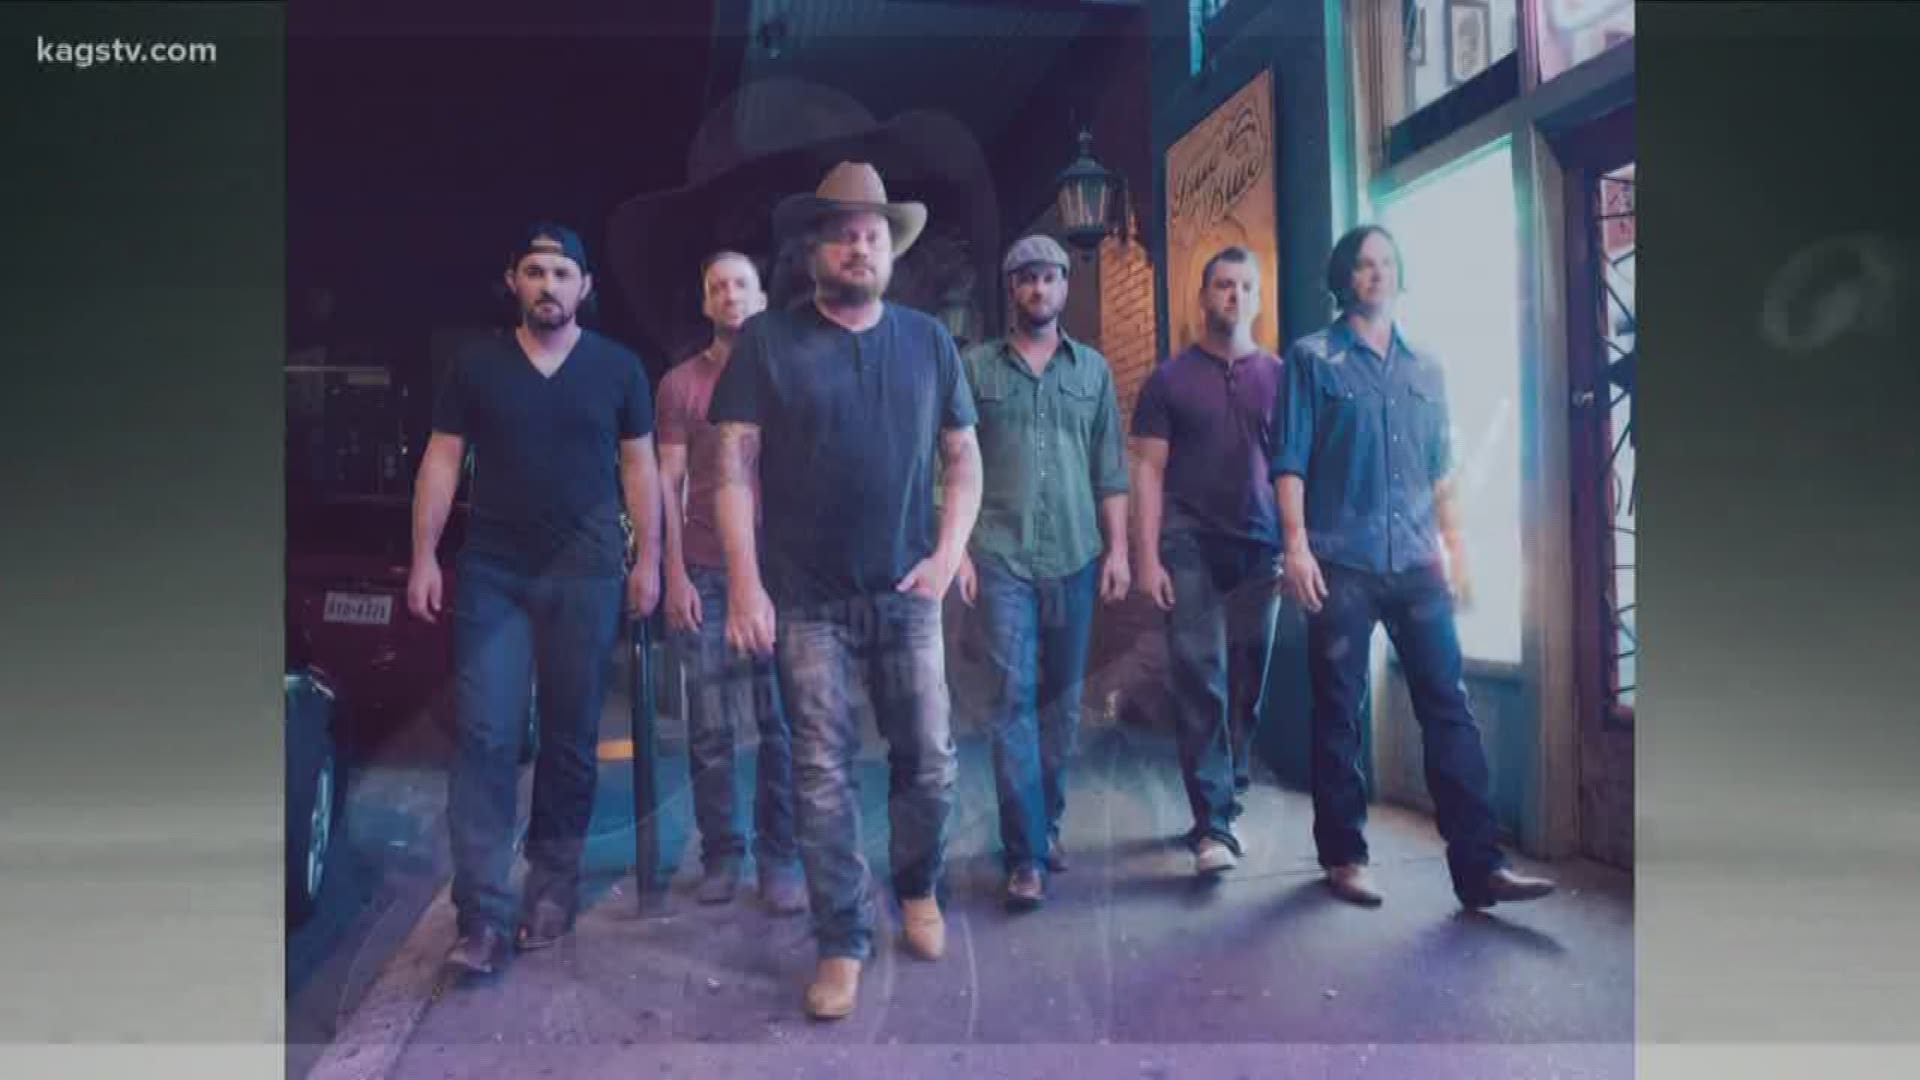 The long awaited announcement of local country music fans, and beer fans alike, the Chilifest lineup has been unveiled.